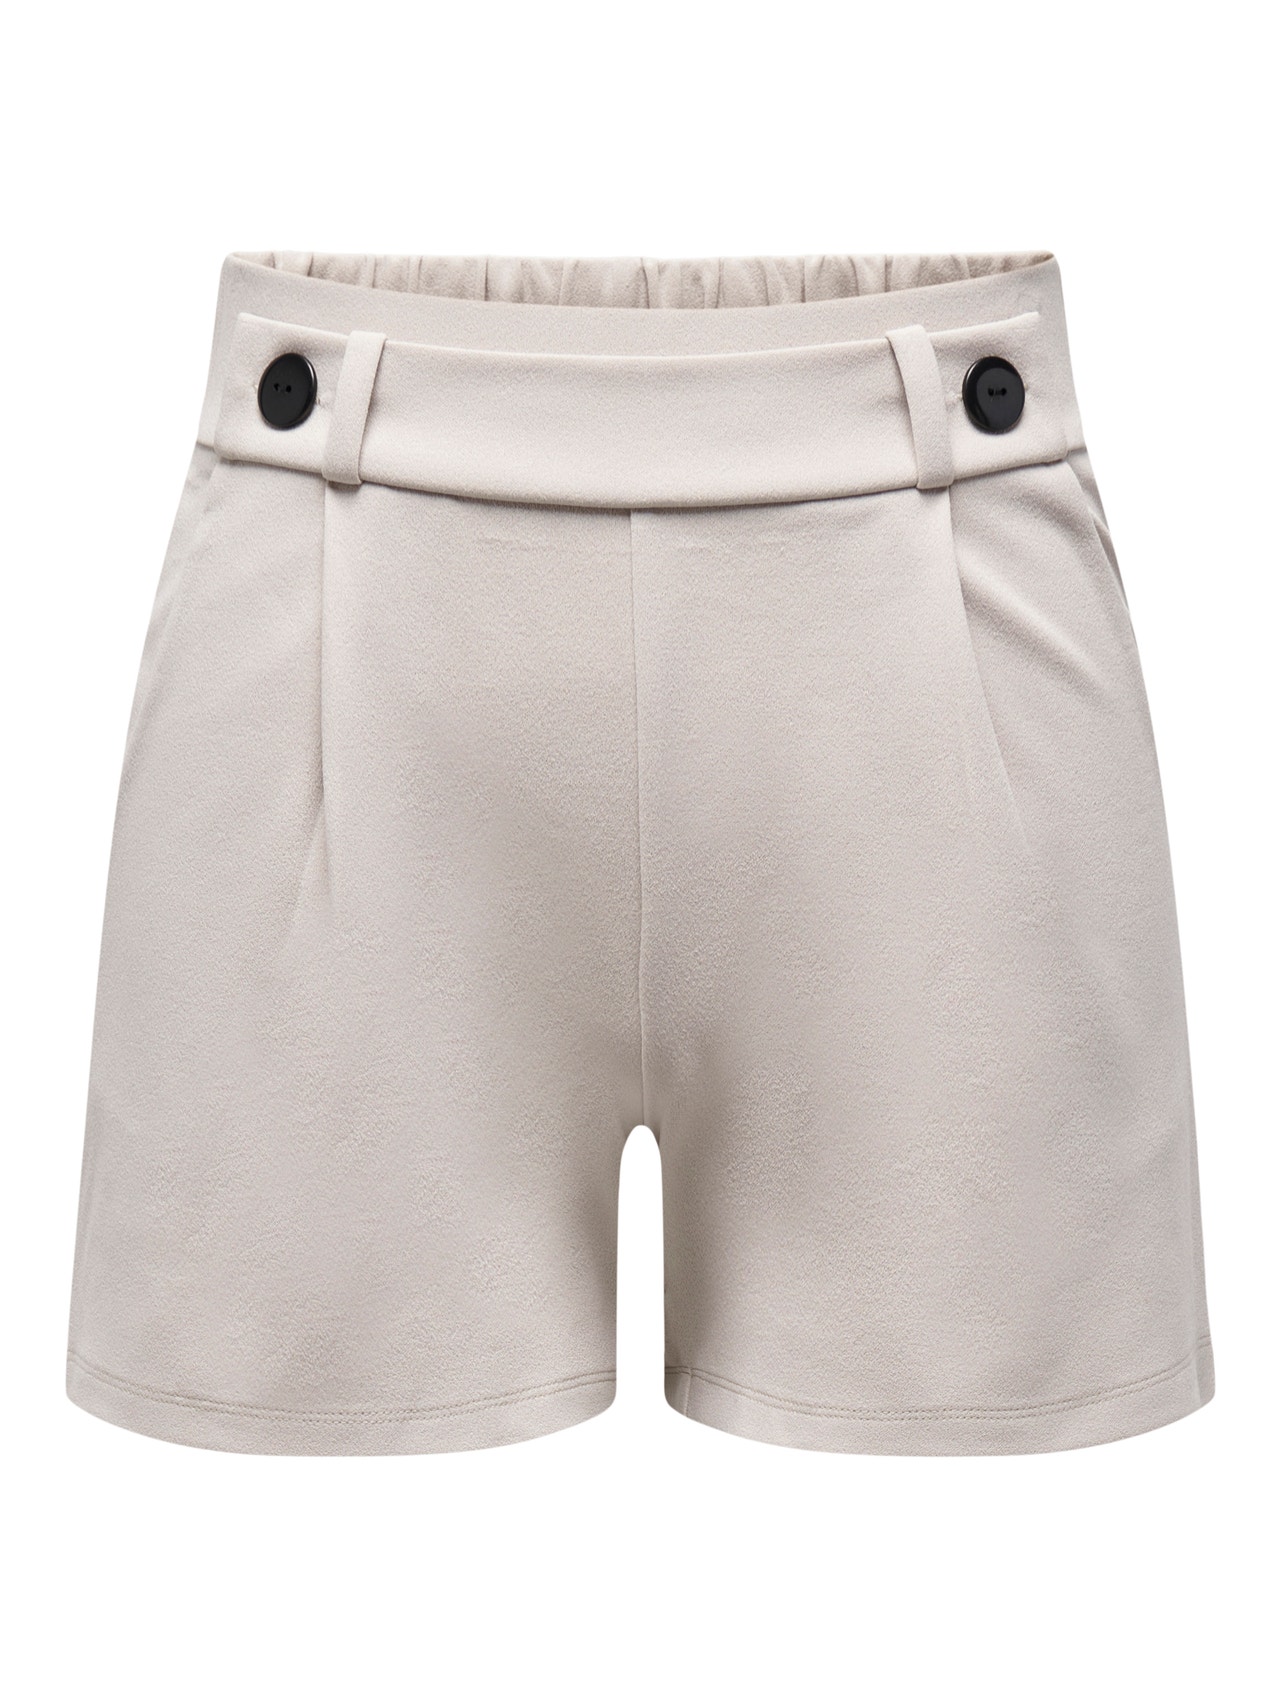 ONLY Enfärgade Shorts -Chateau Gray - 15203098